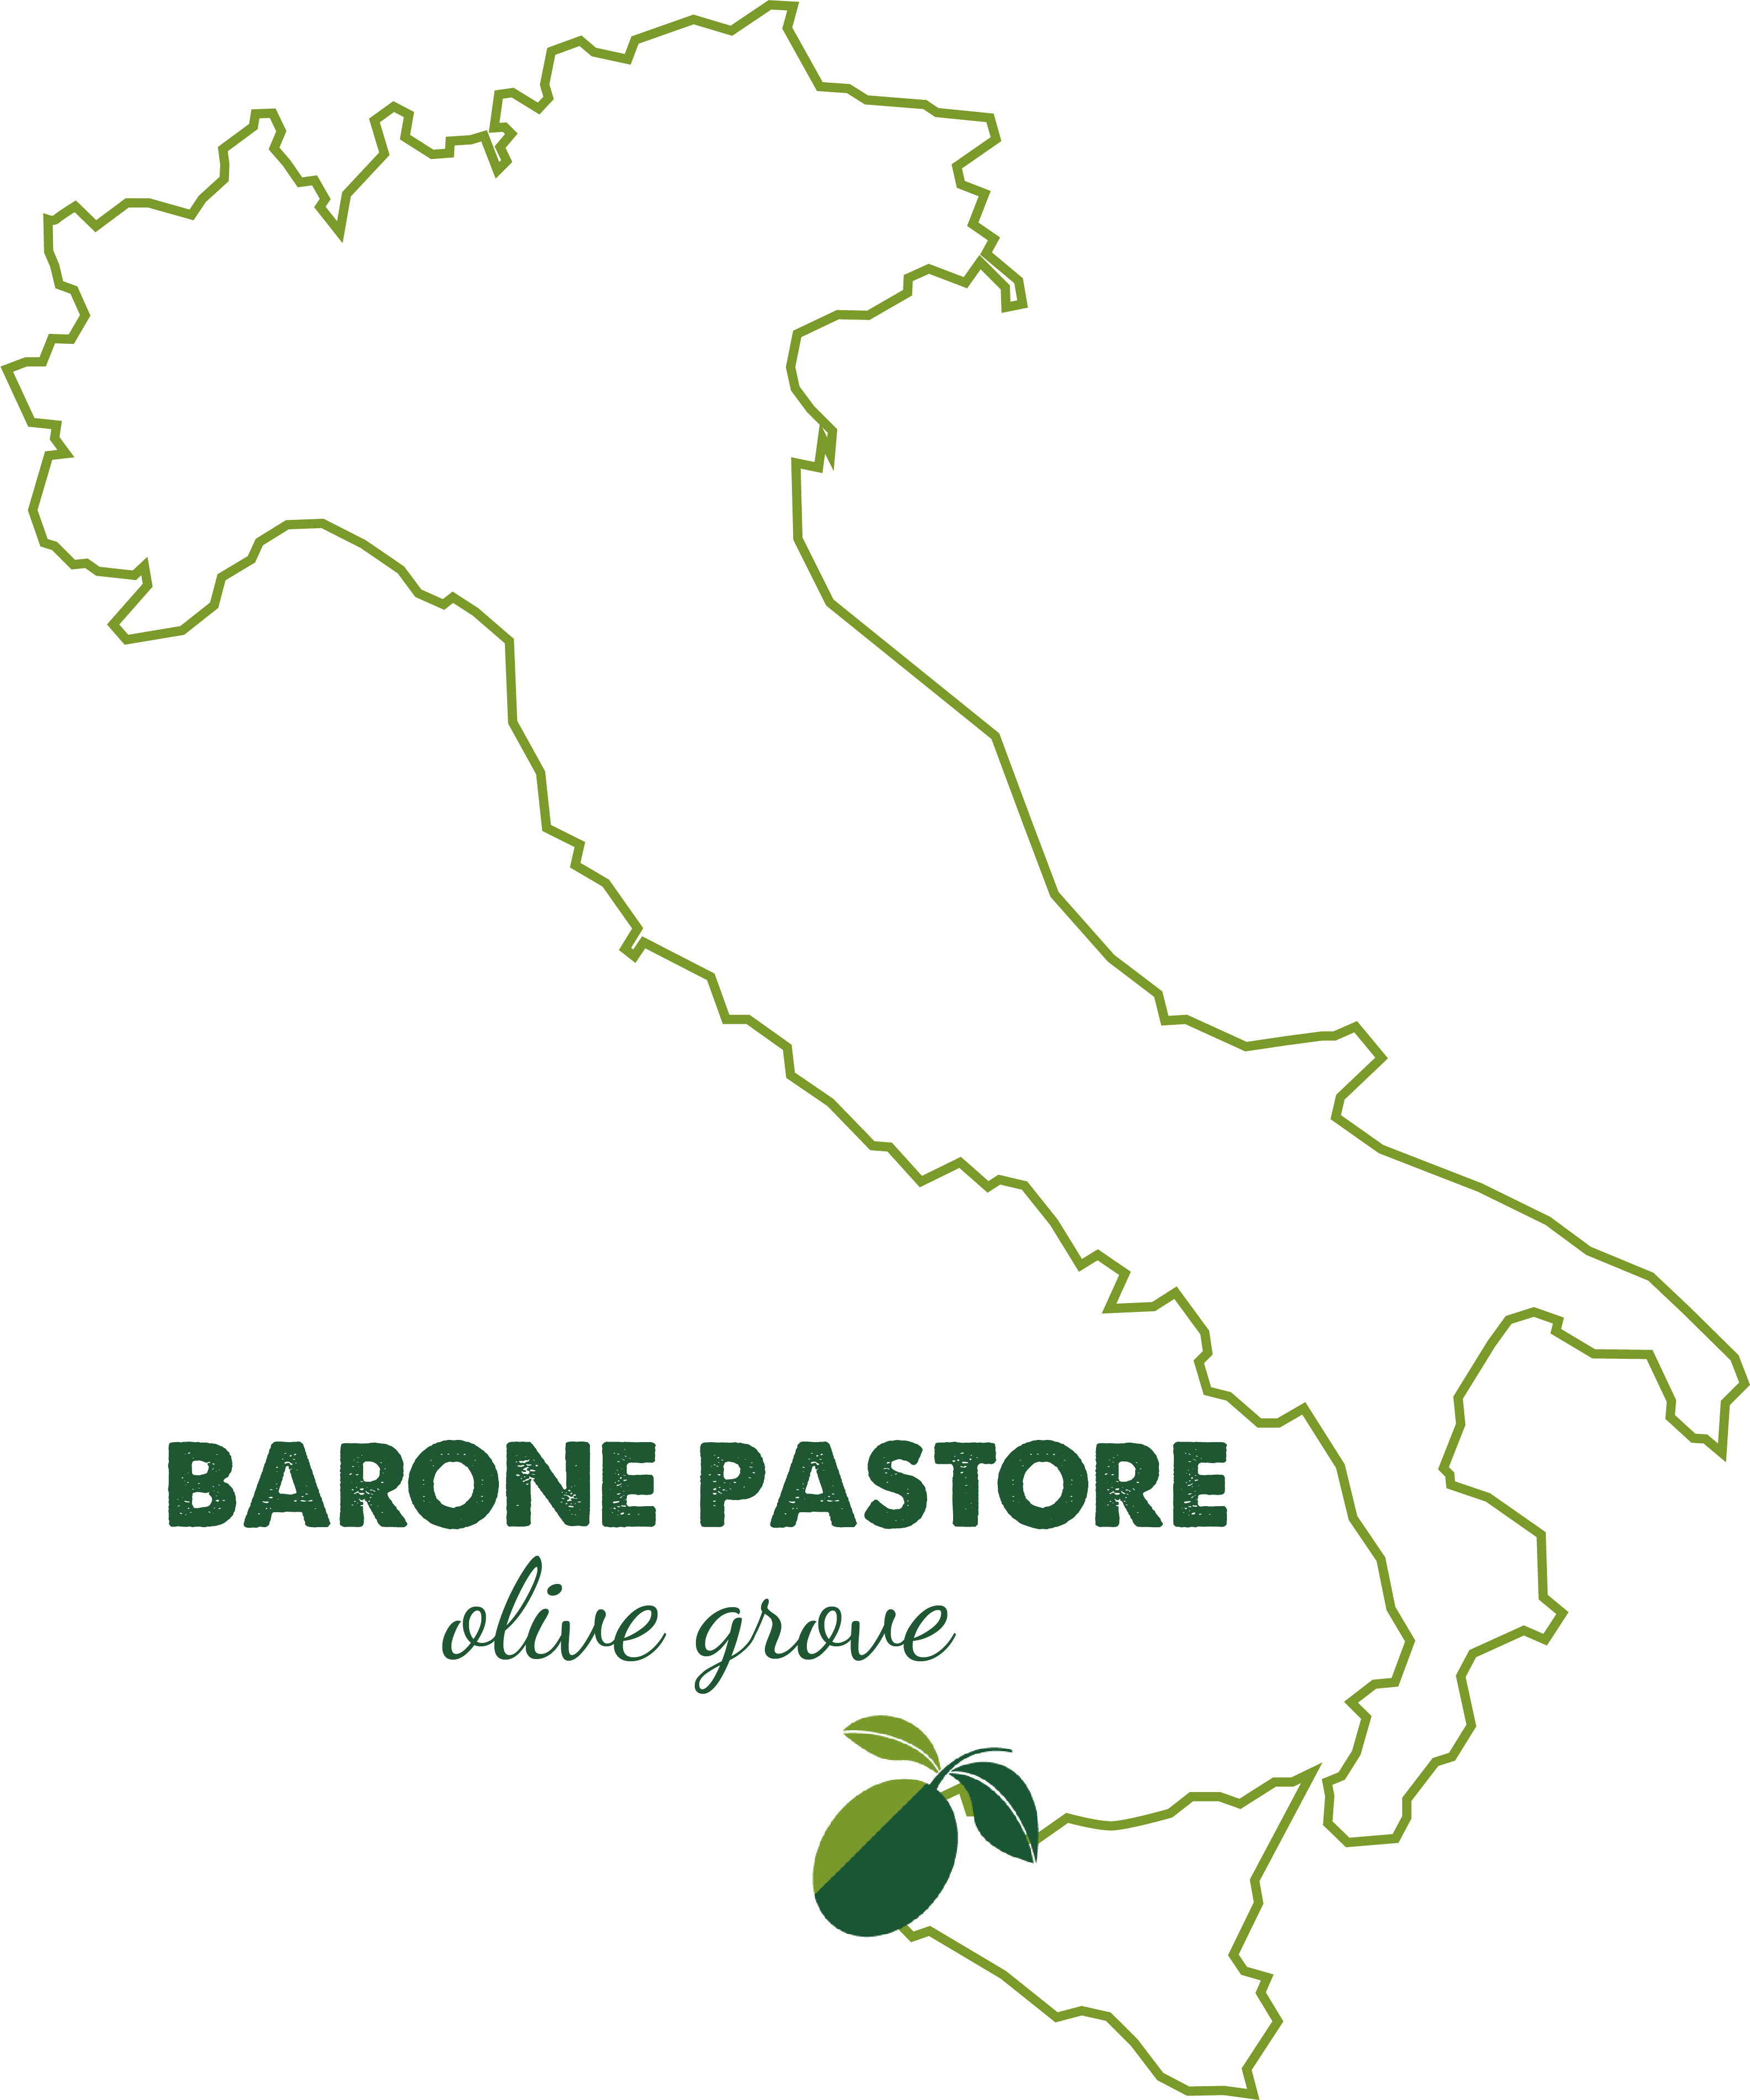 00317138052440-barone-pastore-grove-map-1676891217364.png